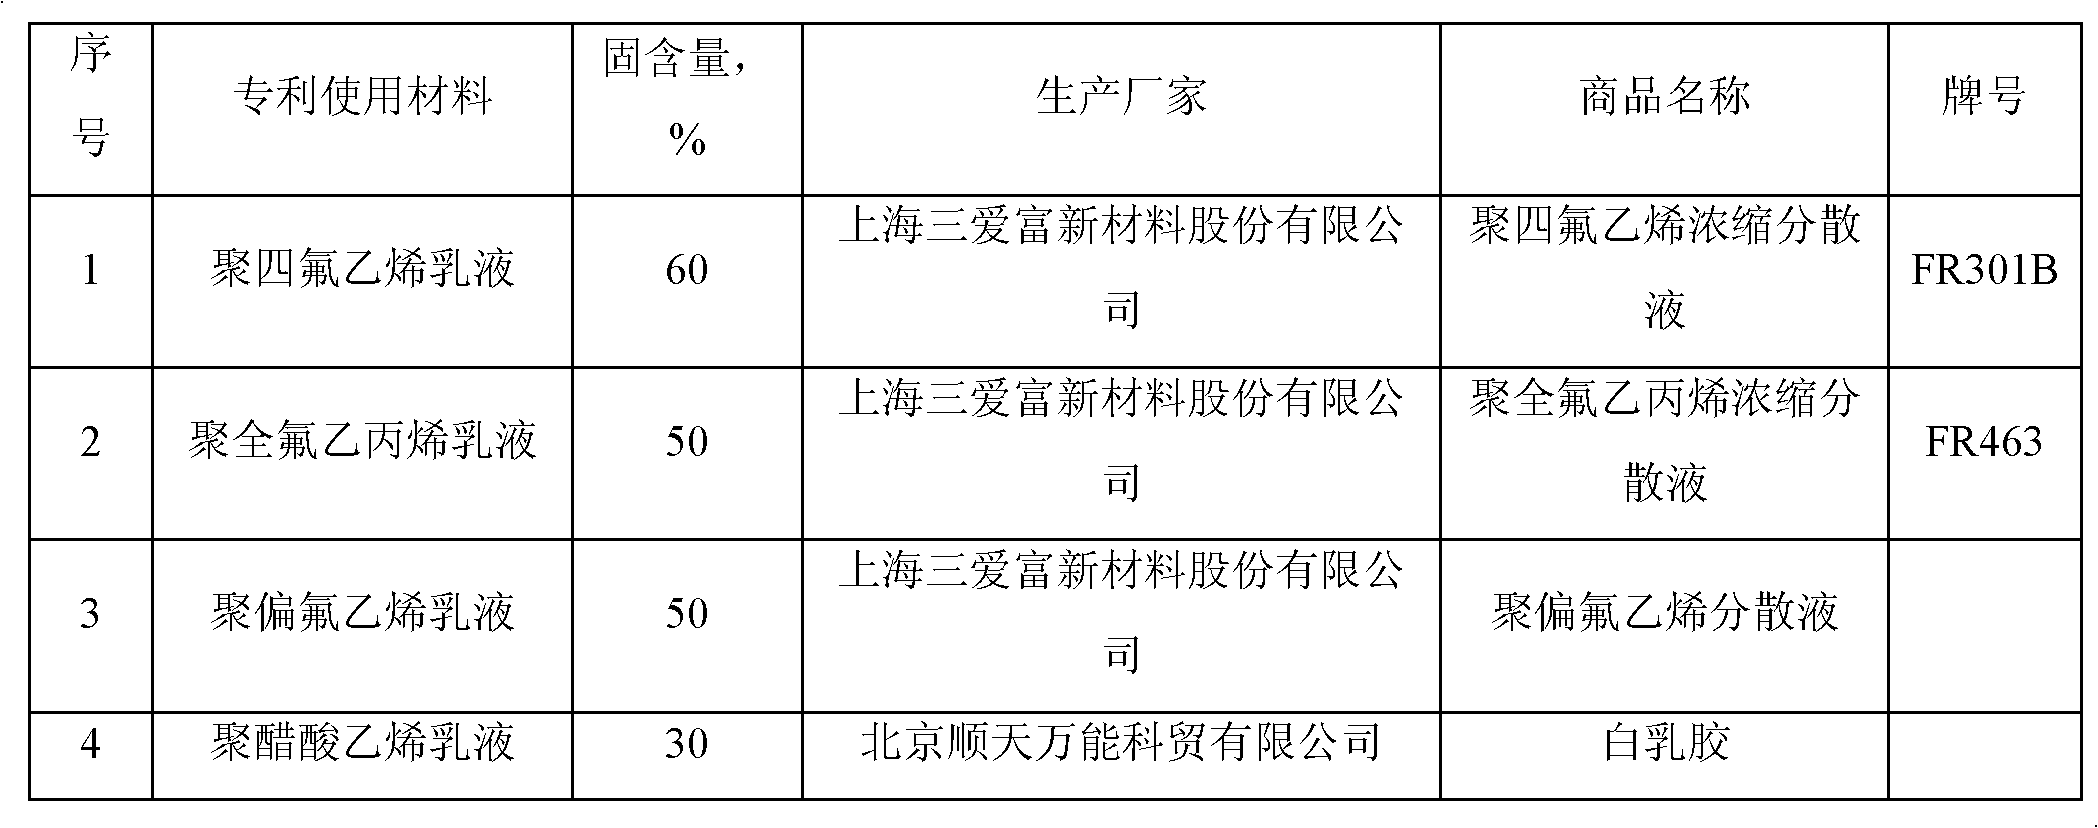 Super-hydrophobic propping agent and preparation method